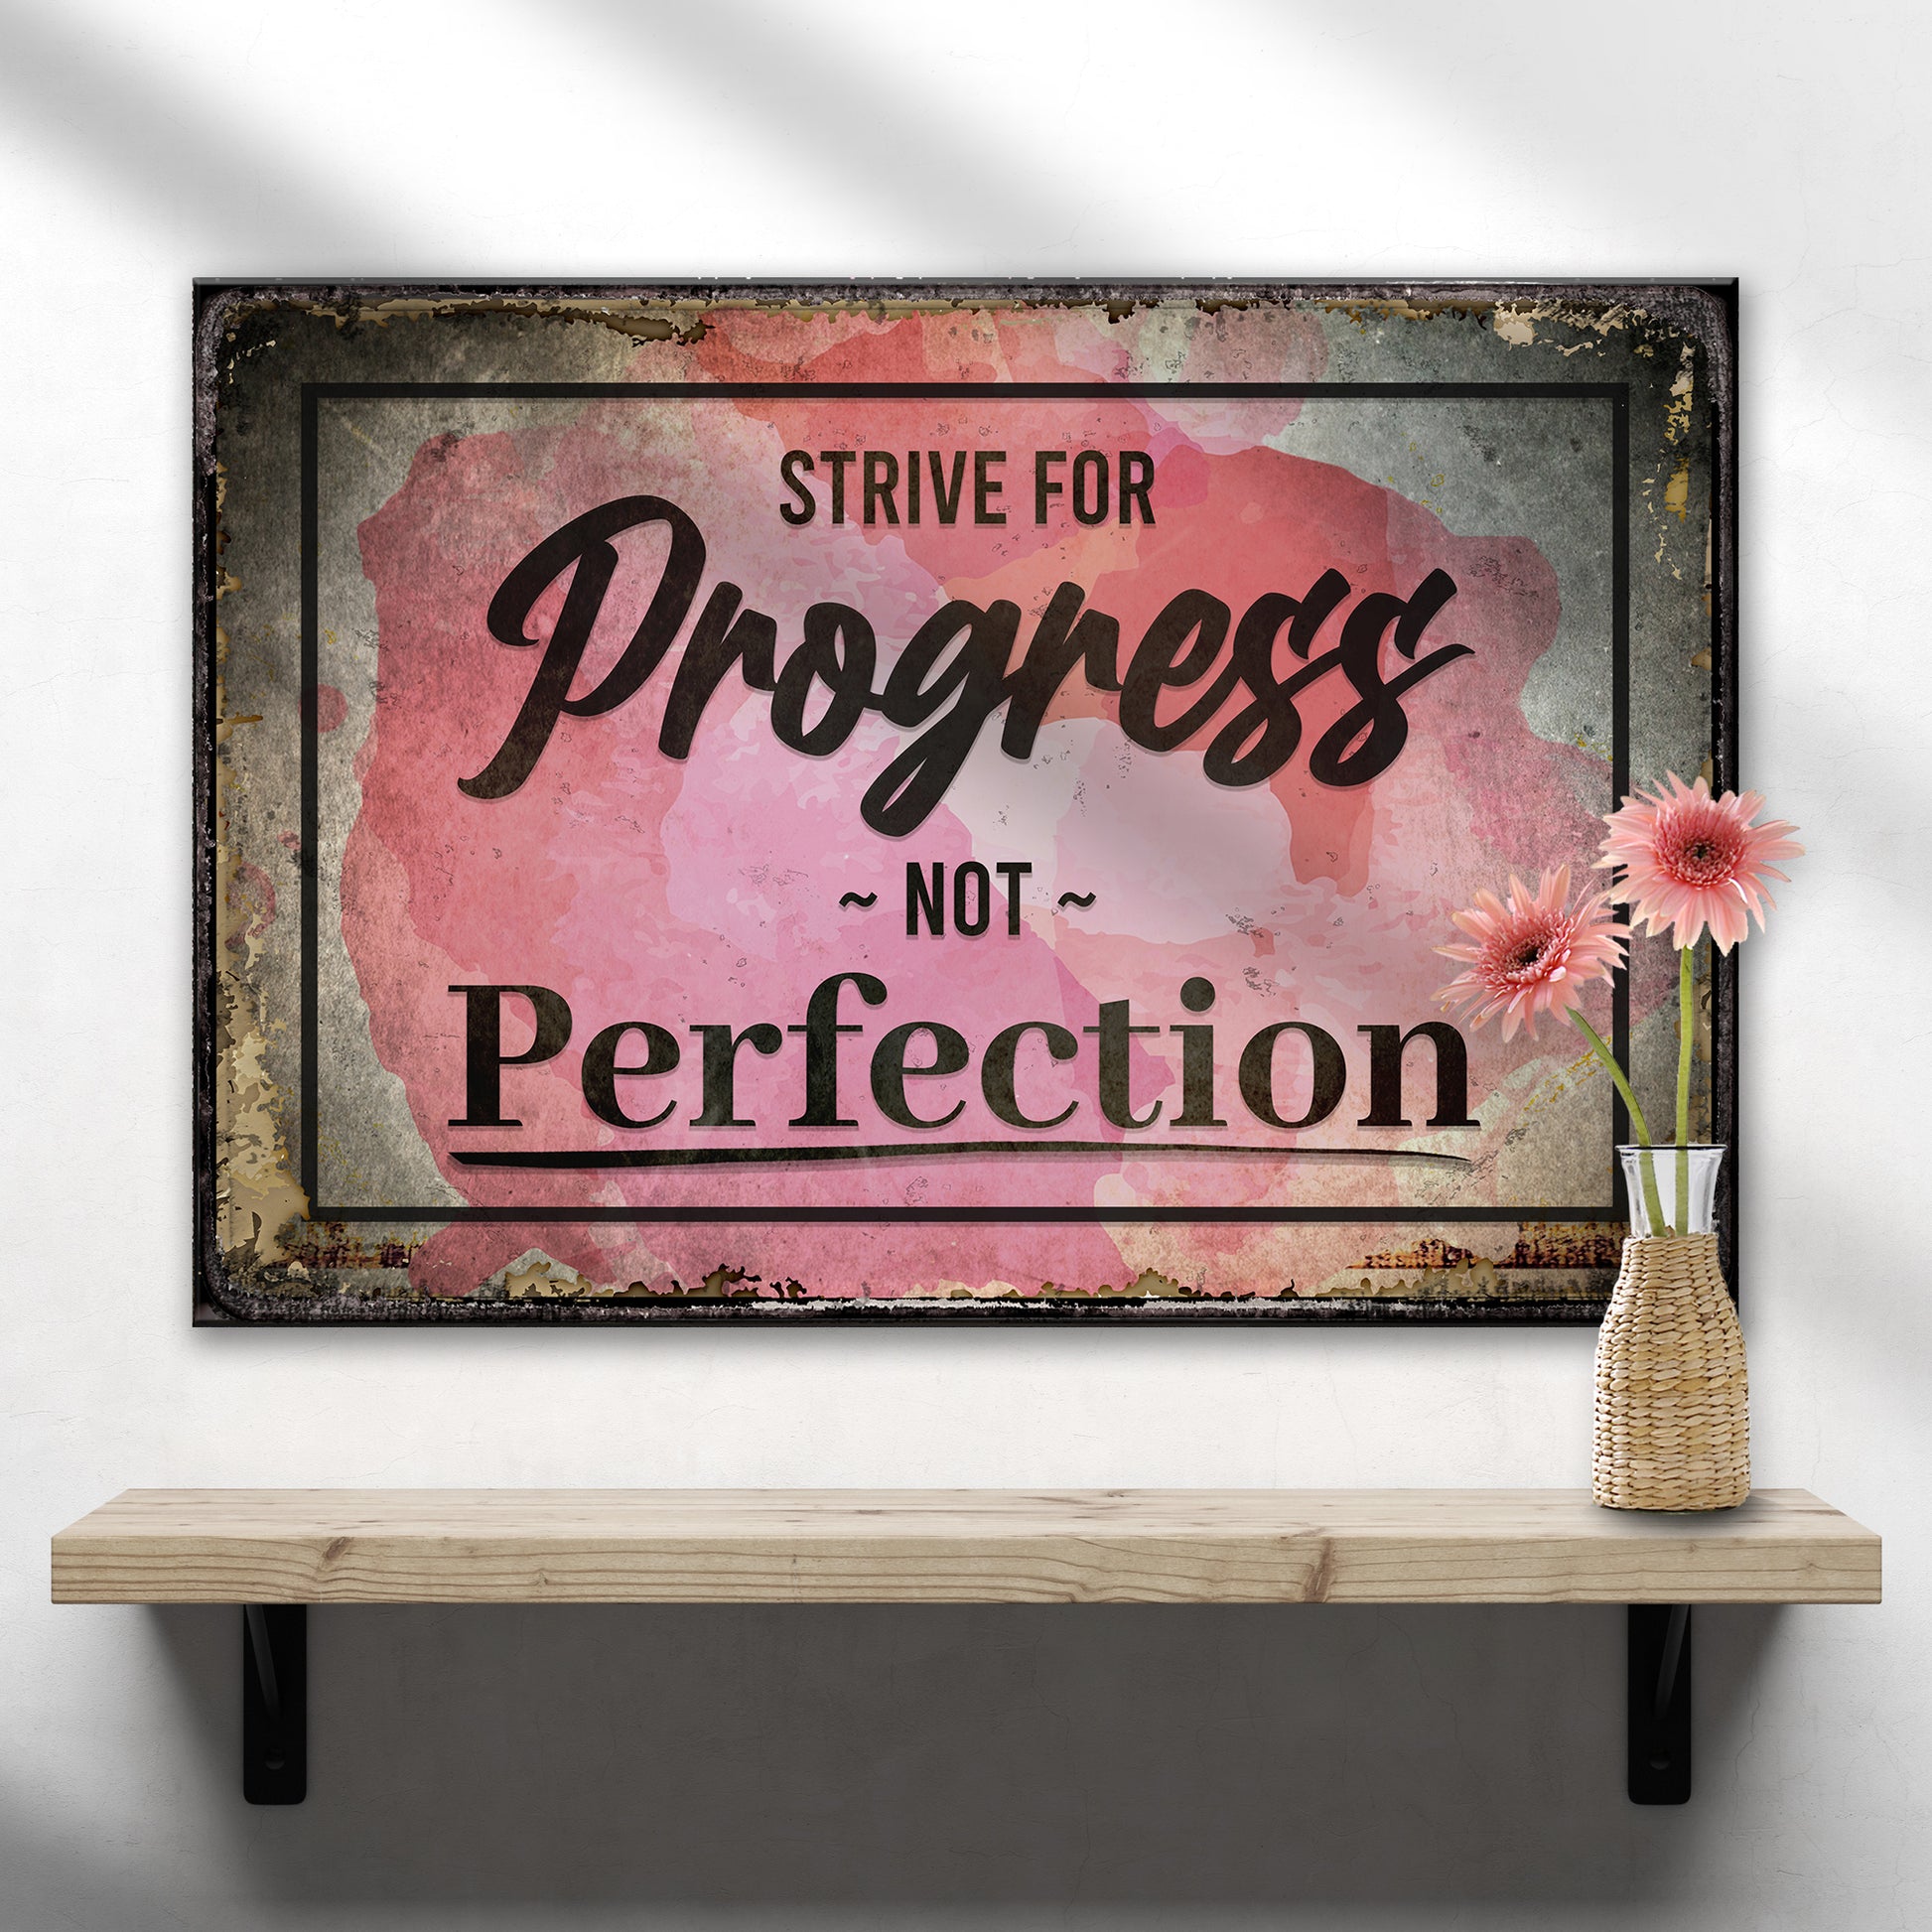 Strive For Progress Not Perfection Motivational Sign - Image by Tailored Canvases